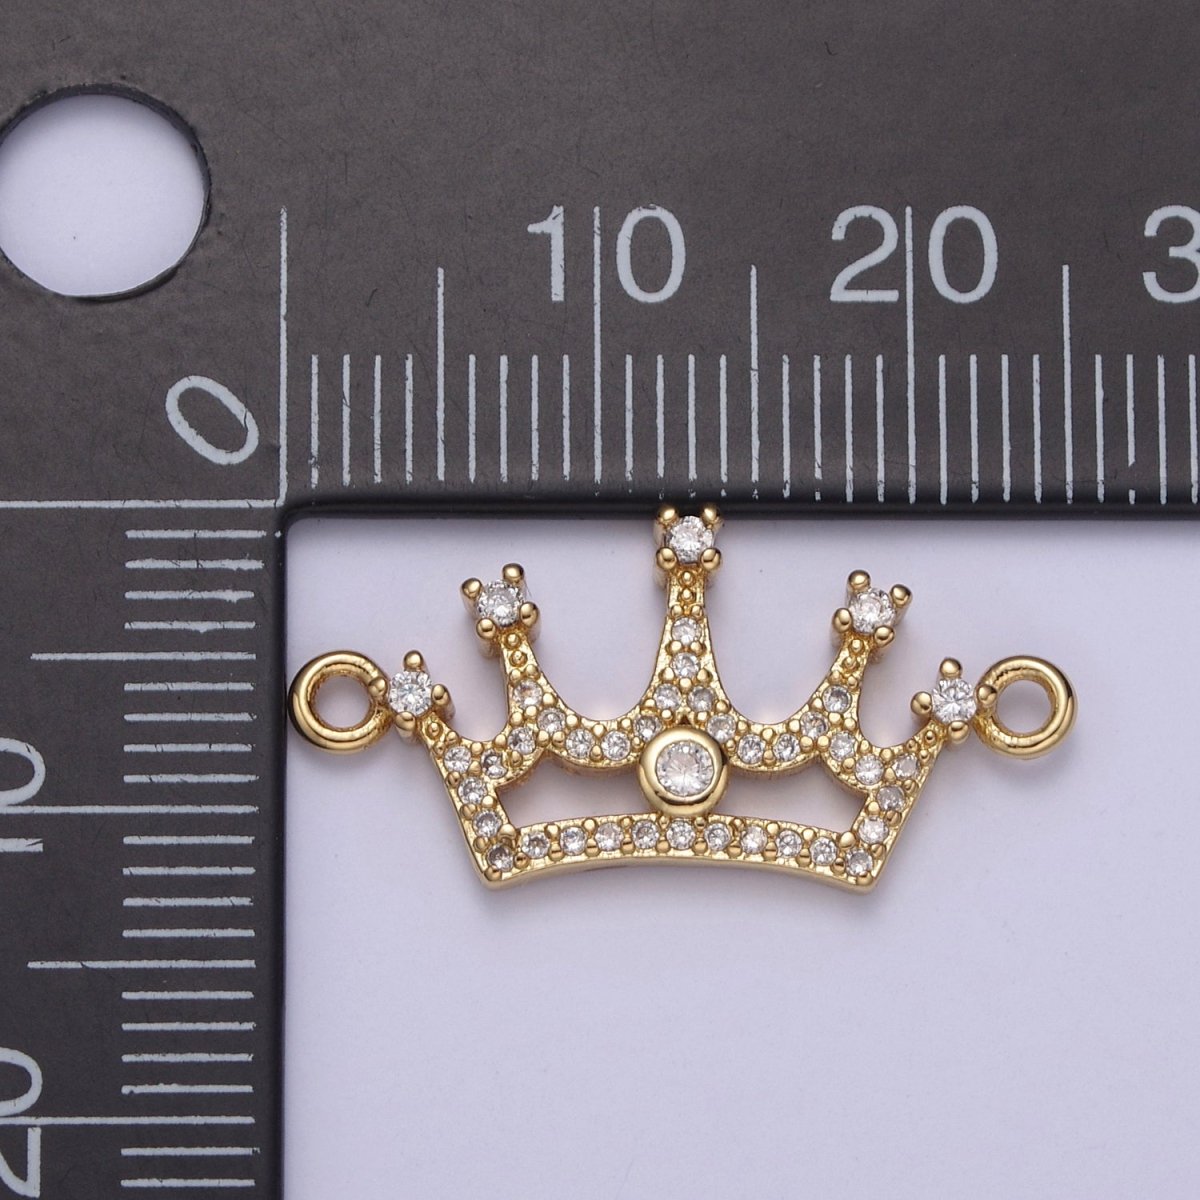 Dainty Tiara Charm Connector in 24k Gold Filled Micro Pave Princess Crown Gift Bracelet Jewelry Making Supply N-120 - DLUXCA